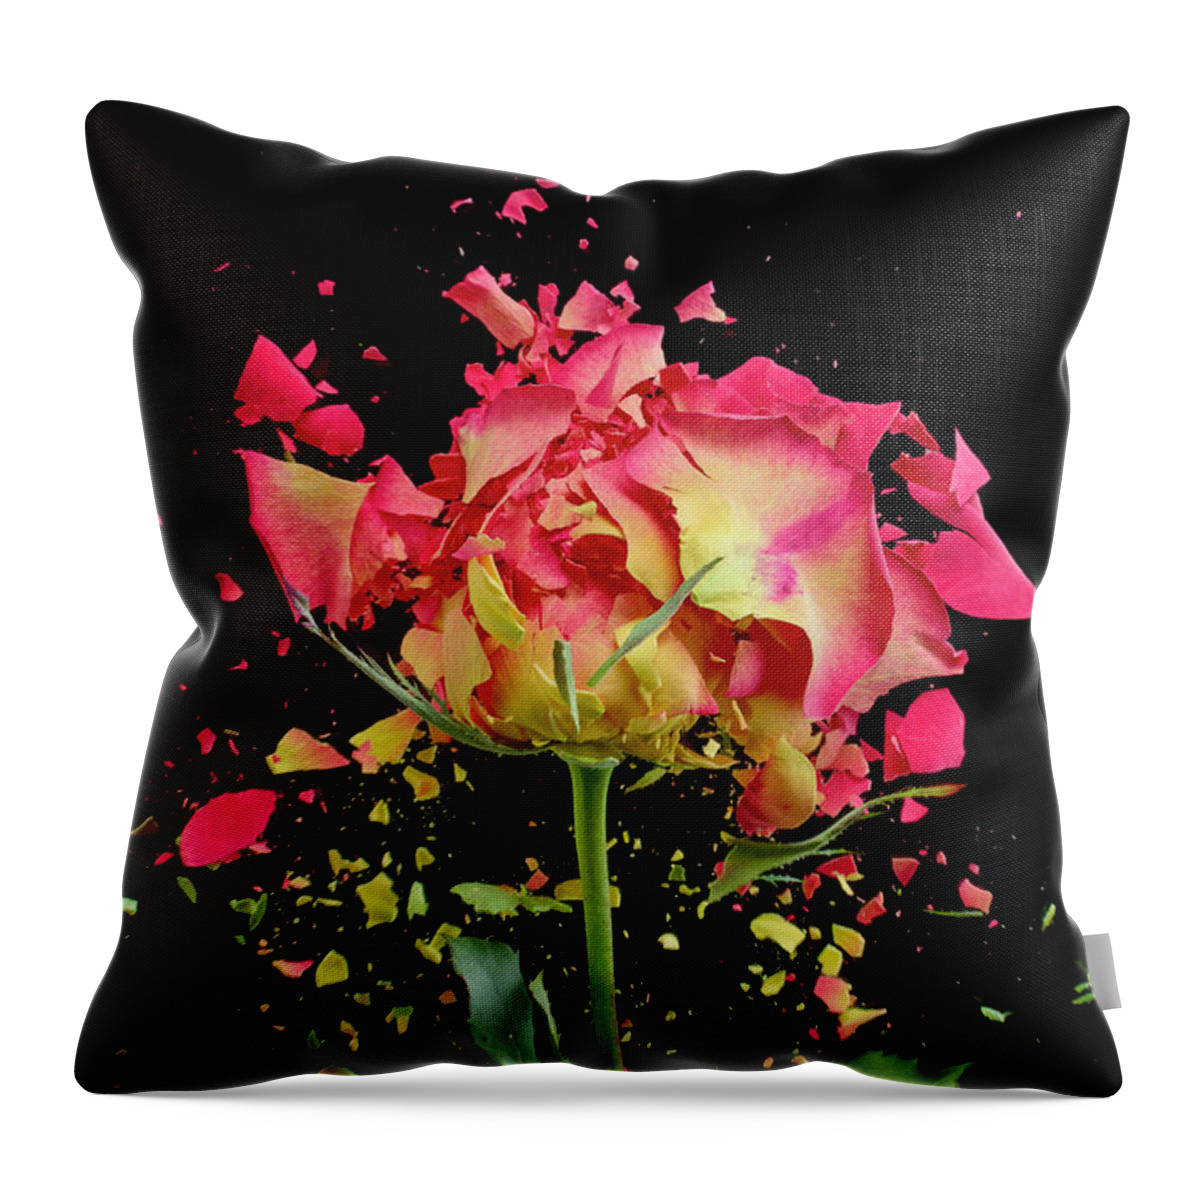 Black Background Throw Pillow featuring the photograph Exploding Rose by Don Farrall